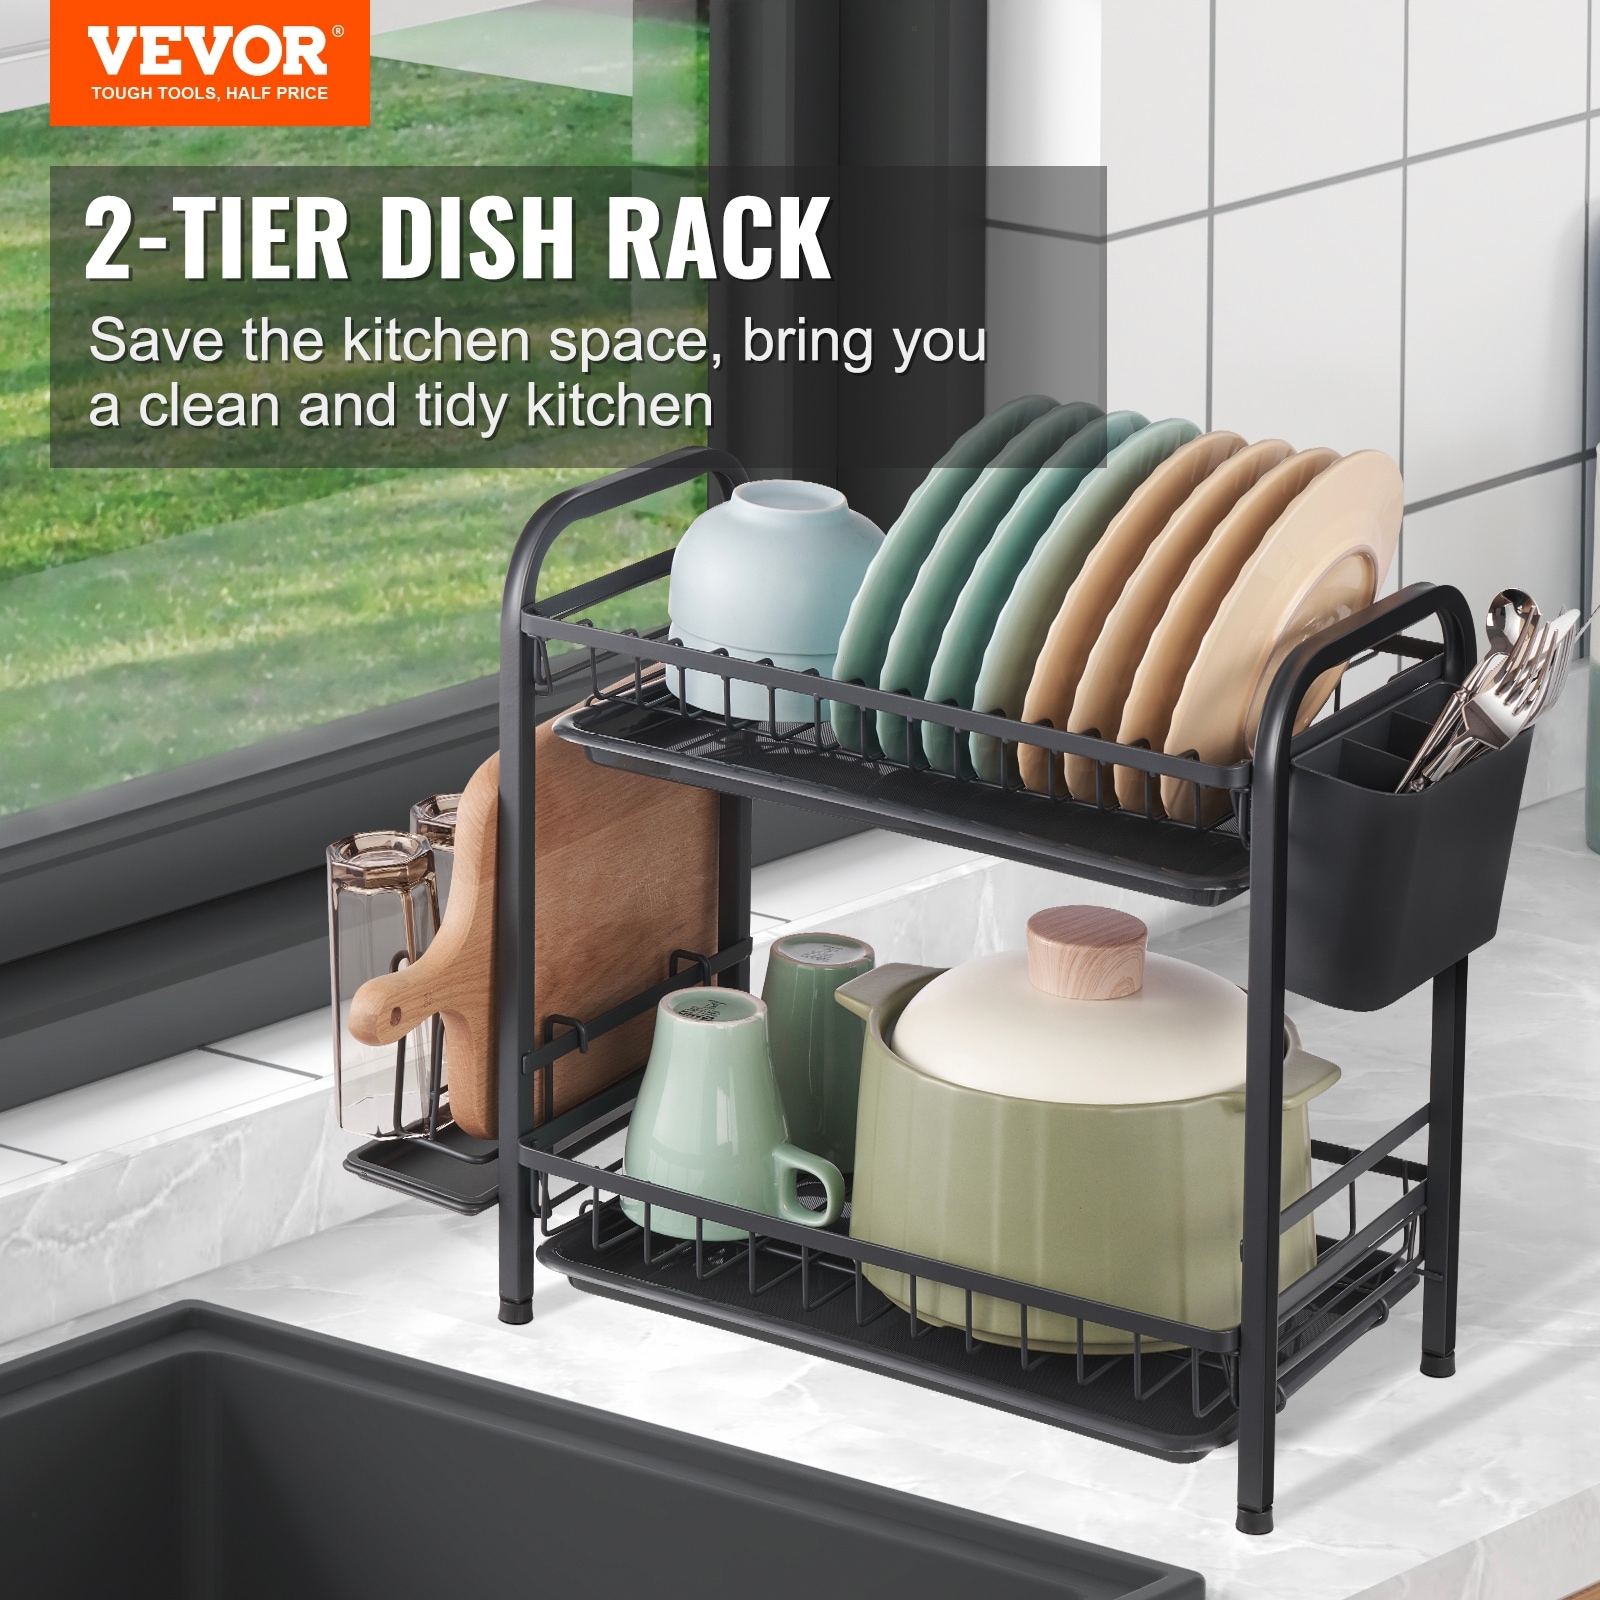 https://ak1.ostkcdn.com/images/products/is/images/direct/0c09fcbfa91ceed8903b74c2b47d37e00bae7e81/VEVOR-2-Tier-Dish-Drying-Rack-Large-Capacity-Drainer-Carbon-Steel-Kitchen-Utensil-Holder.jpg